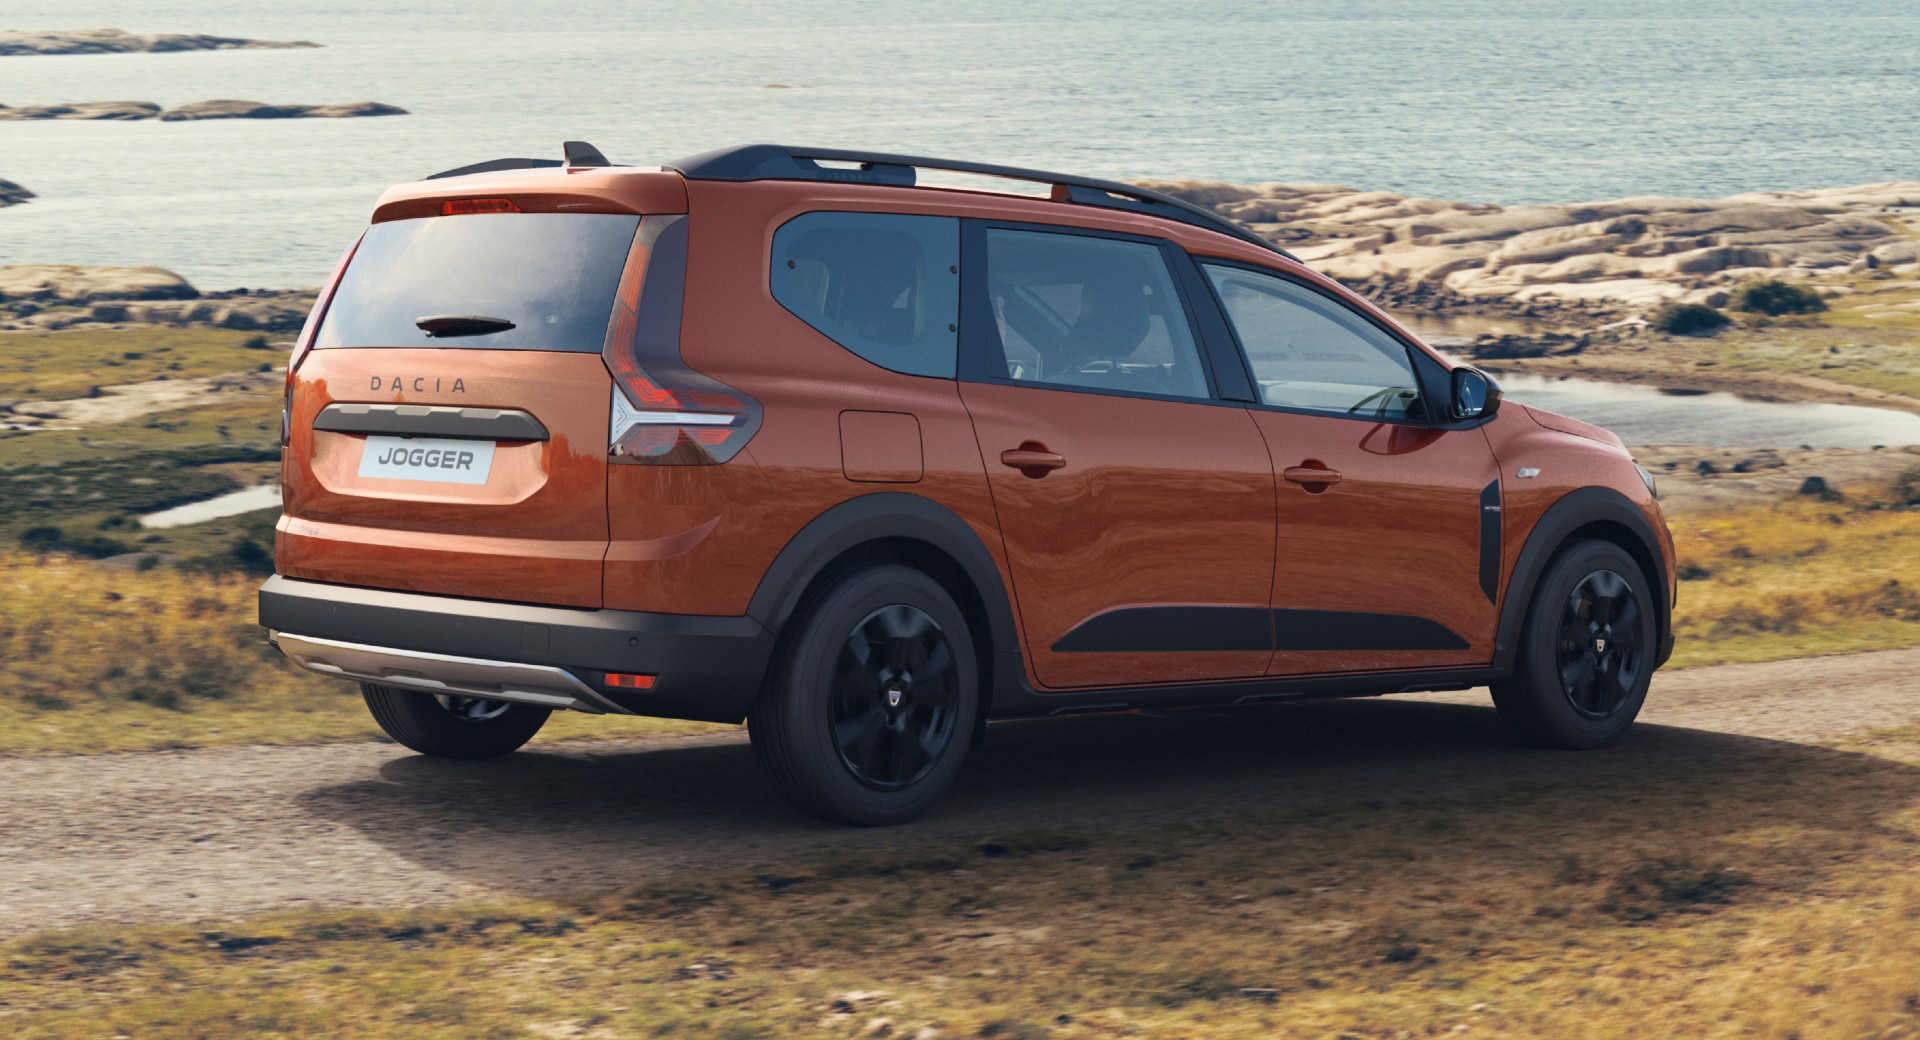 Dacia Jogger offers genuine 7-seater practicality at an